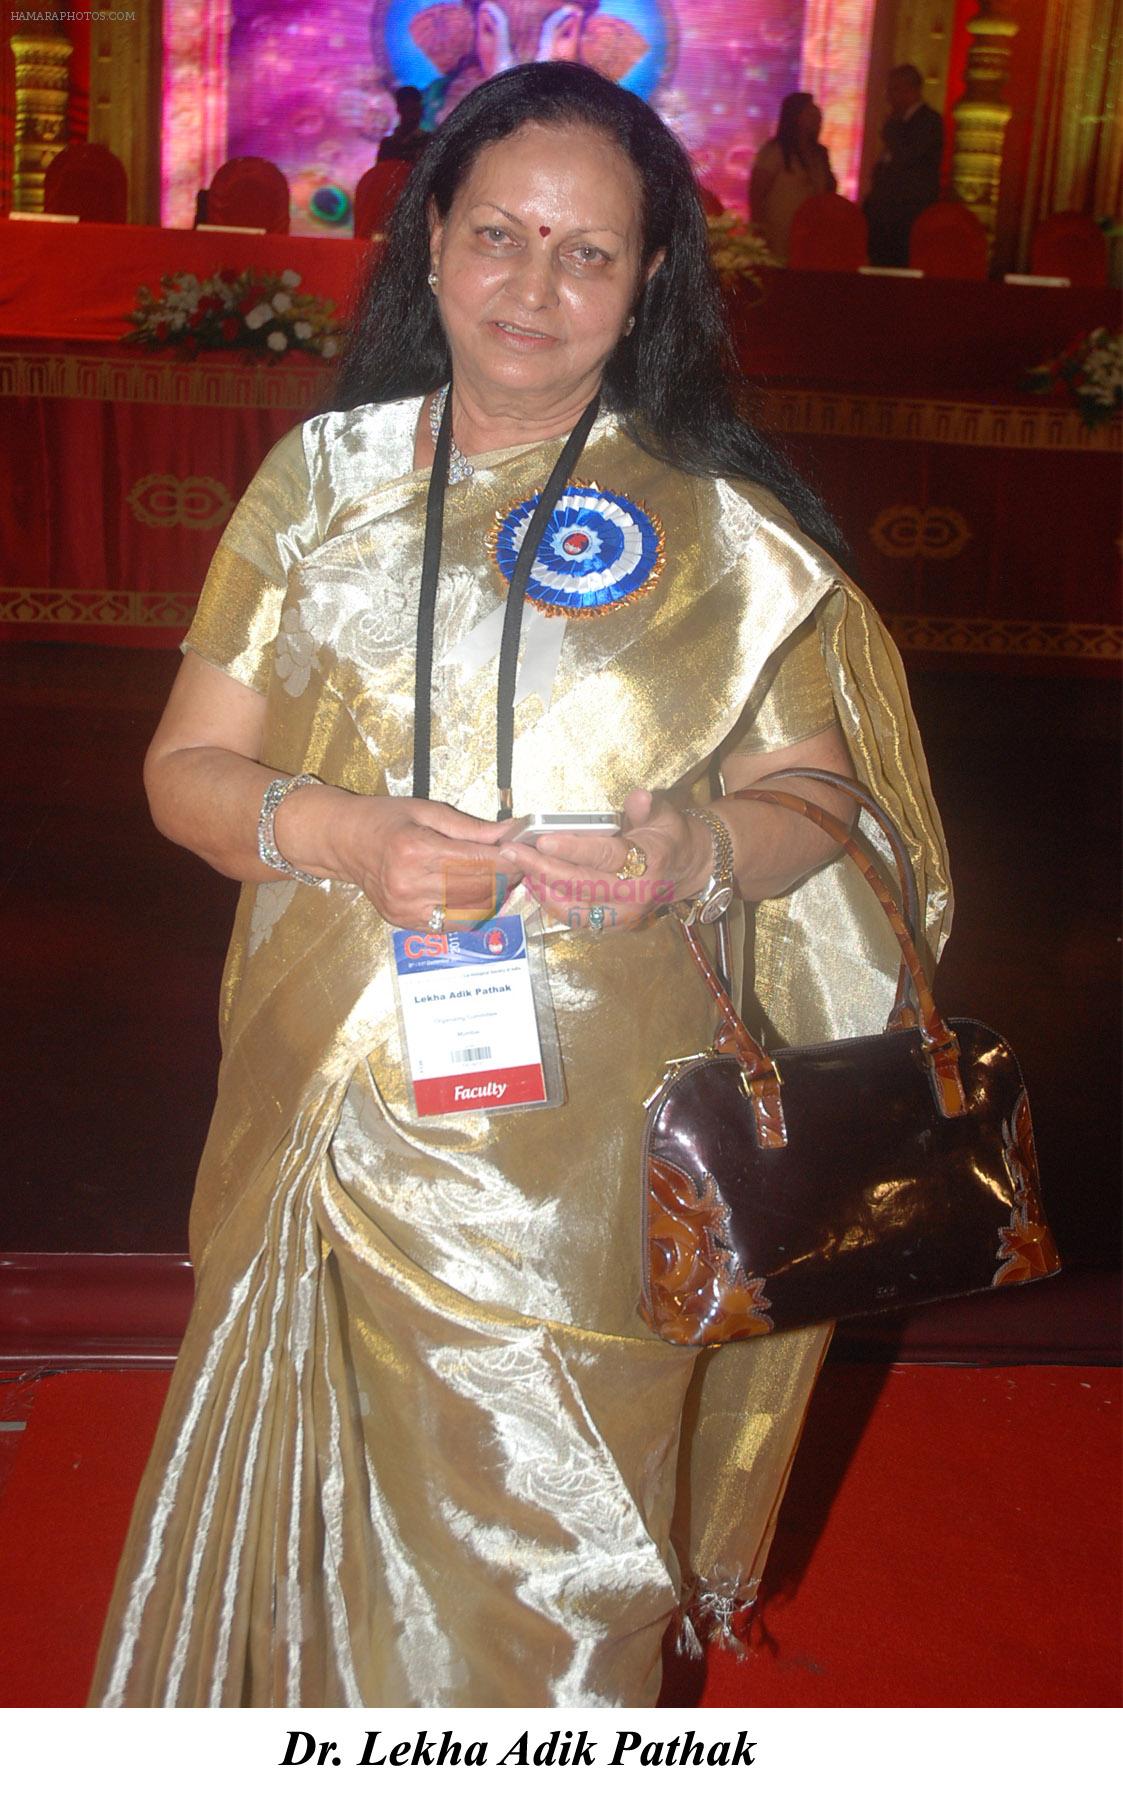 Dr. Lekha Adik Pathak at the 63rd Annual Conference of Cardiological Society of India in NCPA complex, Mumbai on 9th Dec 2011